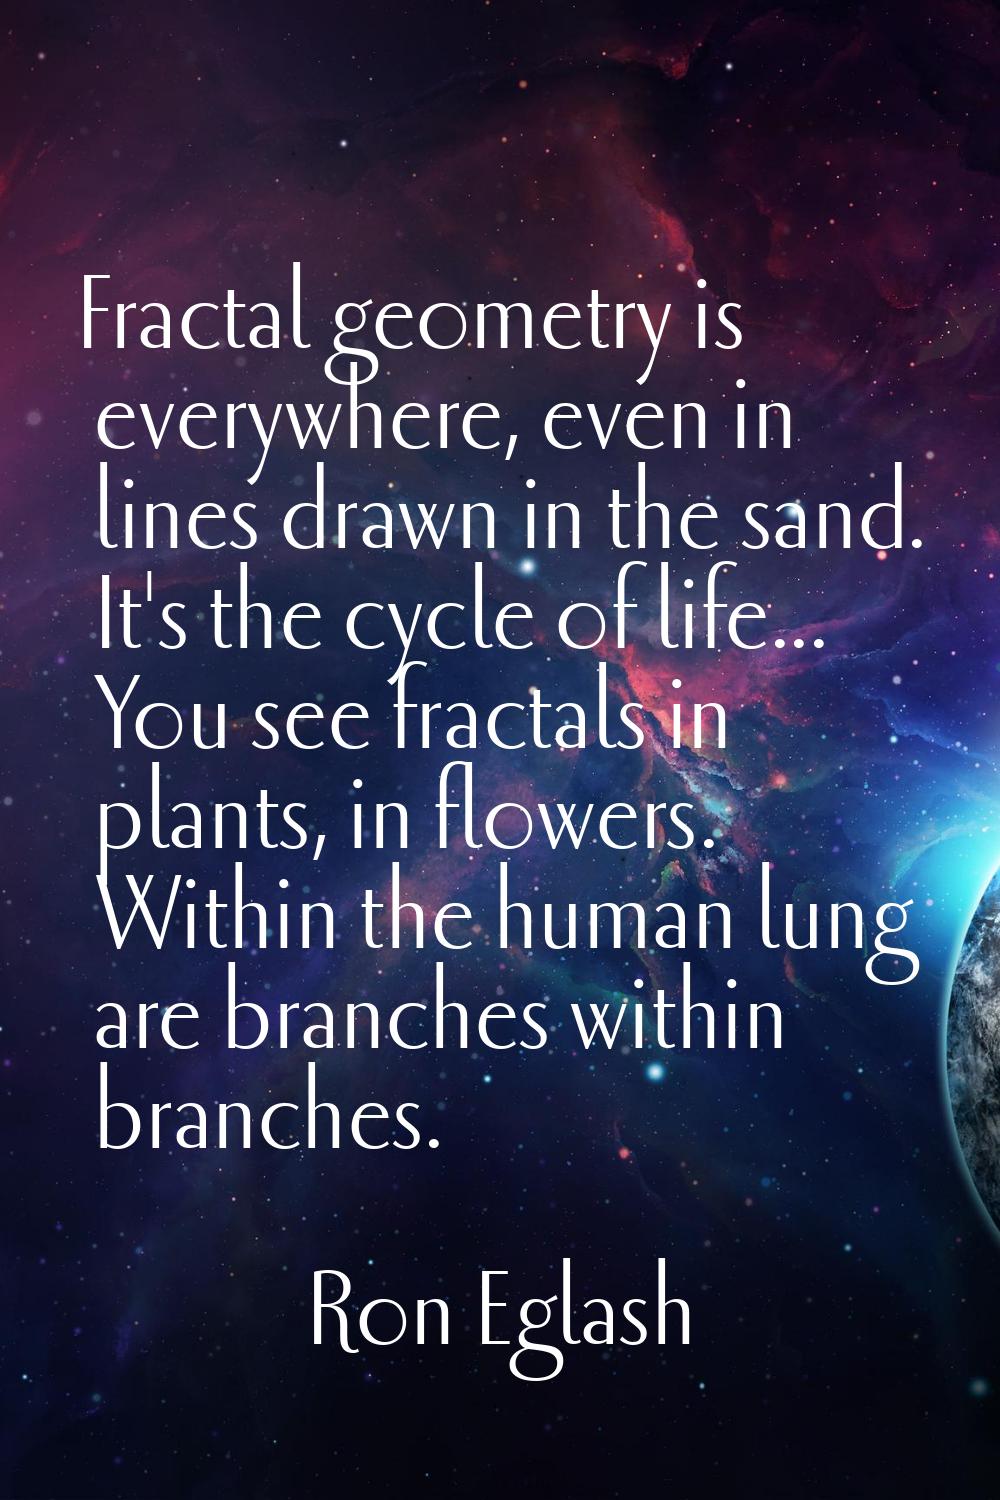 Fractal geometry is everywhere, even in lines drawn in the sand. It's the cycle of life... You see 